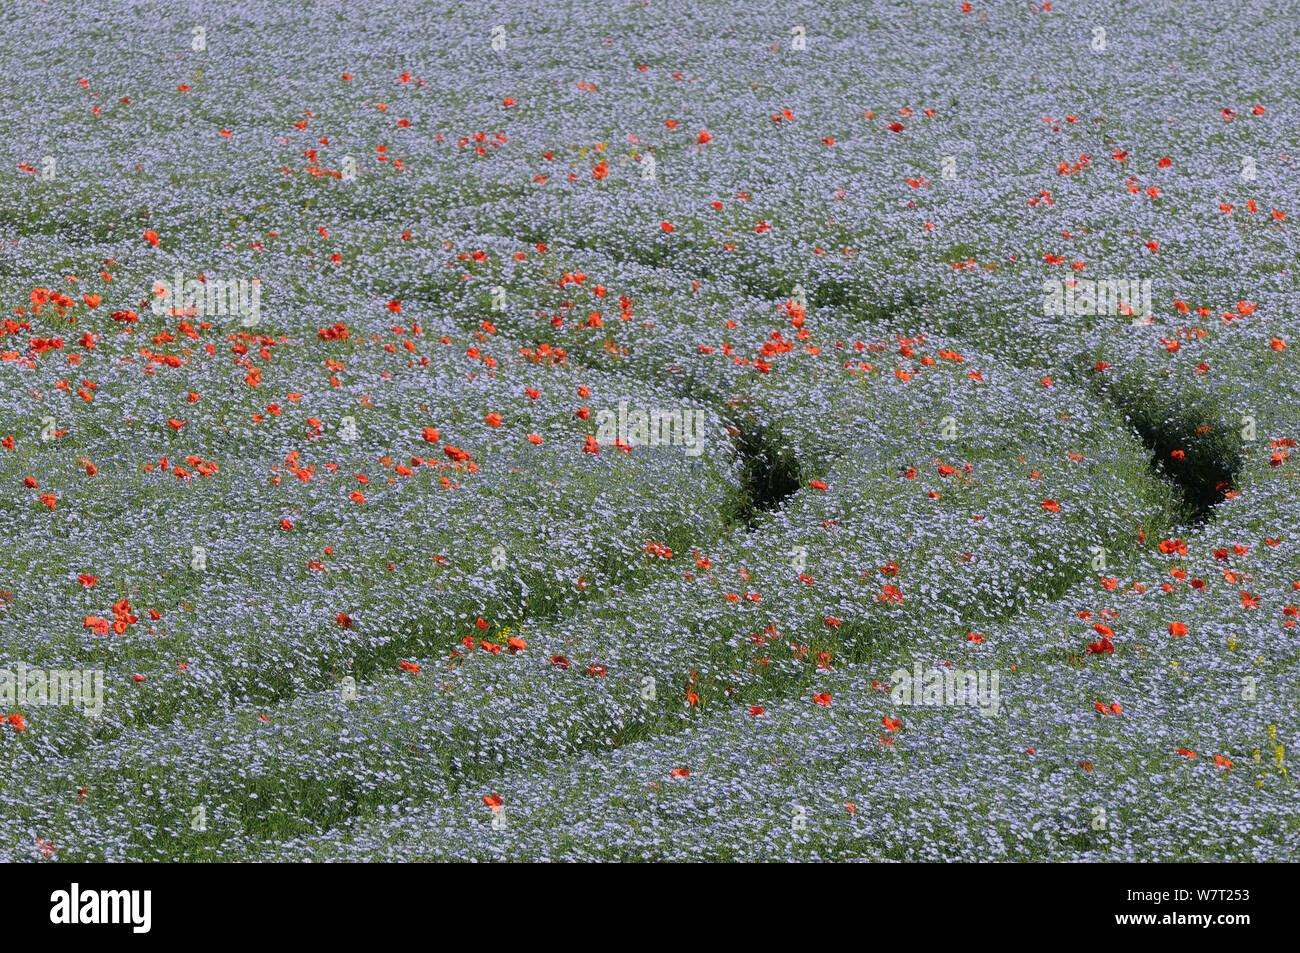 Vehicle tracks through a flowering Linseed crop (Linum usitatissimum) dotted with Common poppies (Papaver rhoeas), Marlborough Downs farmland, Wiltshire, UK, July. Stock Photo